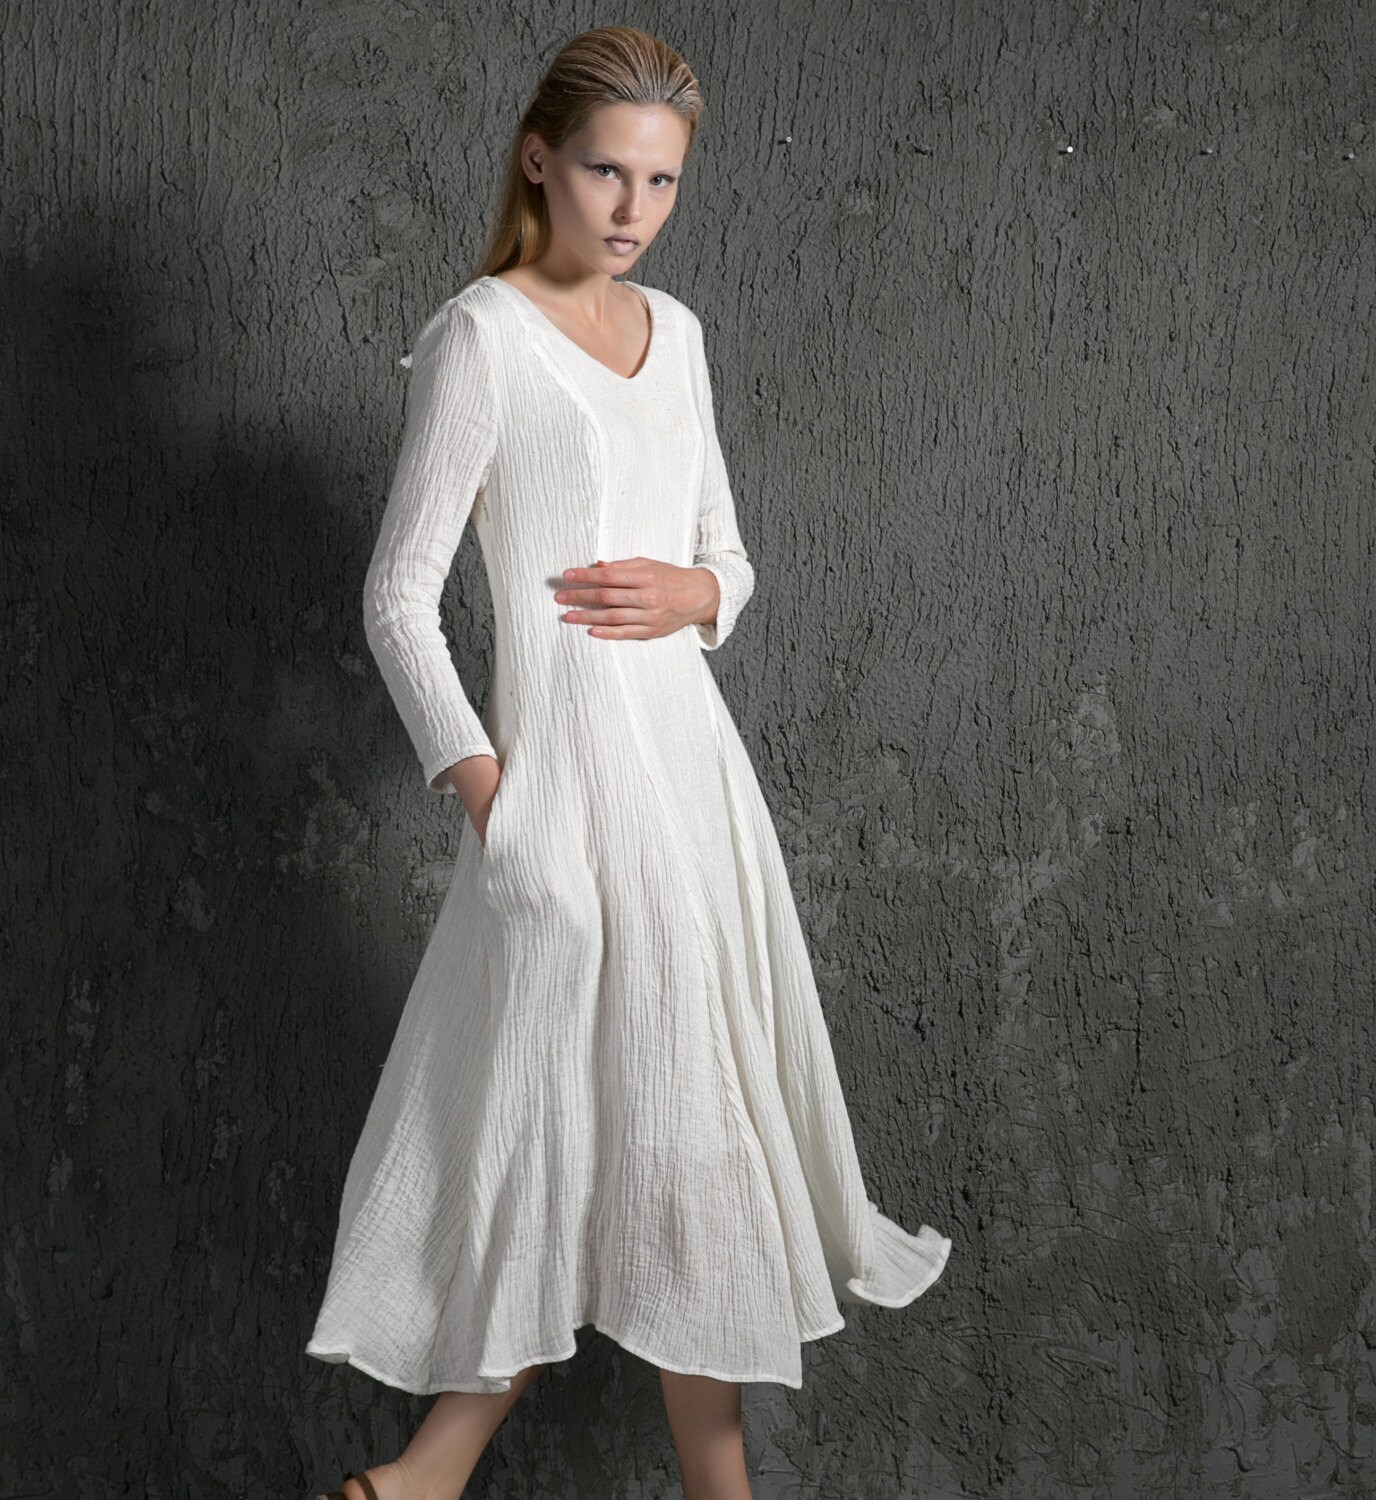 White Linen Dress Classic Elegant Floaty Fit And Flare Party 